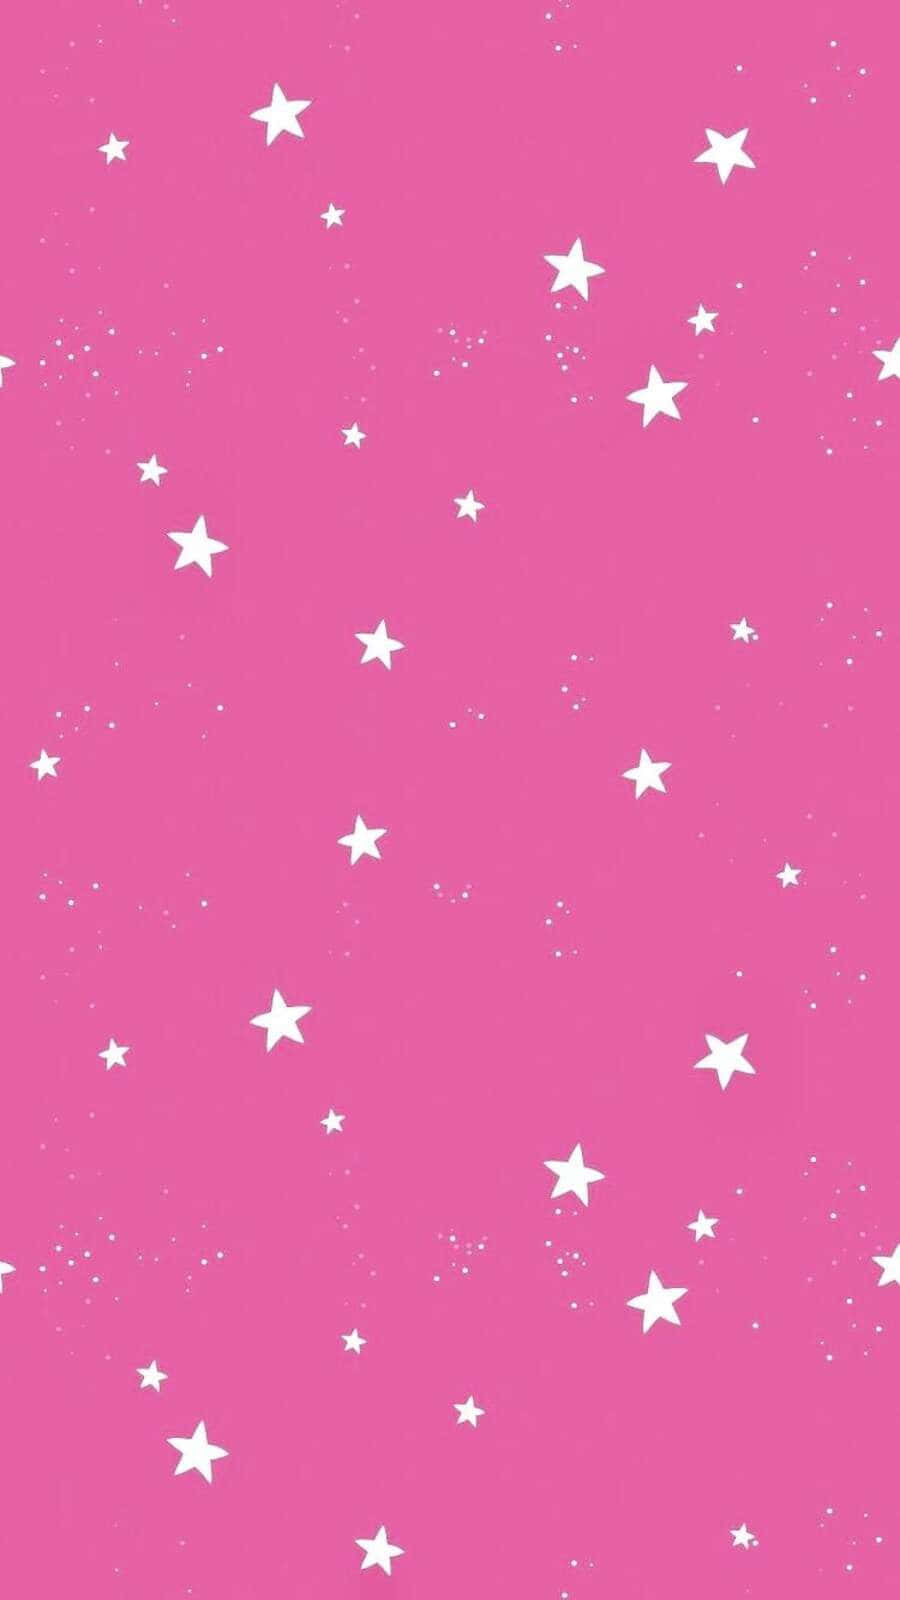 A Dazzling Display Of Pink Stars In The Night Sky